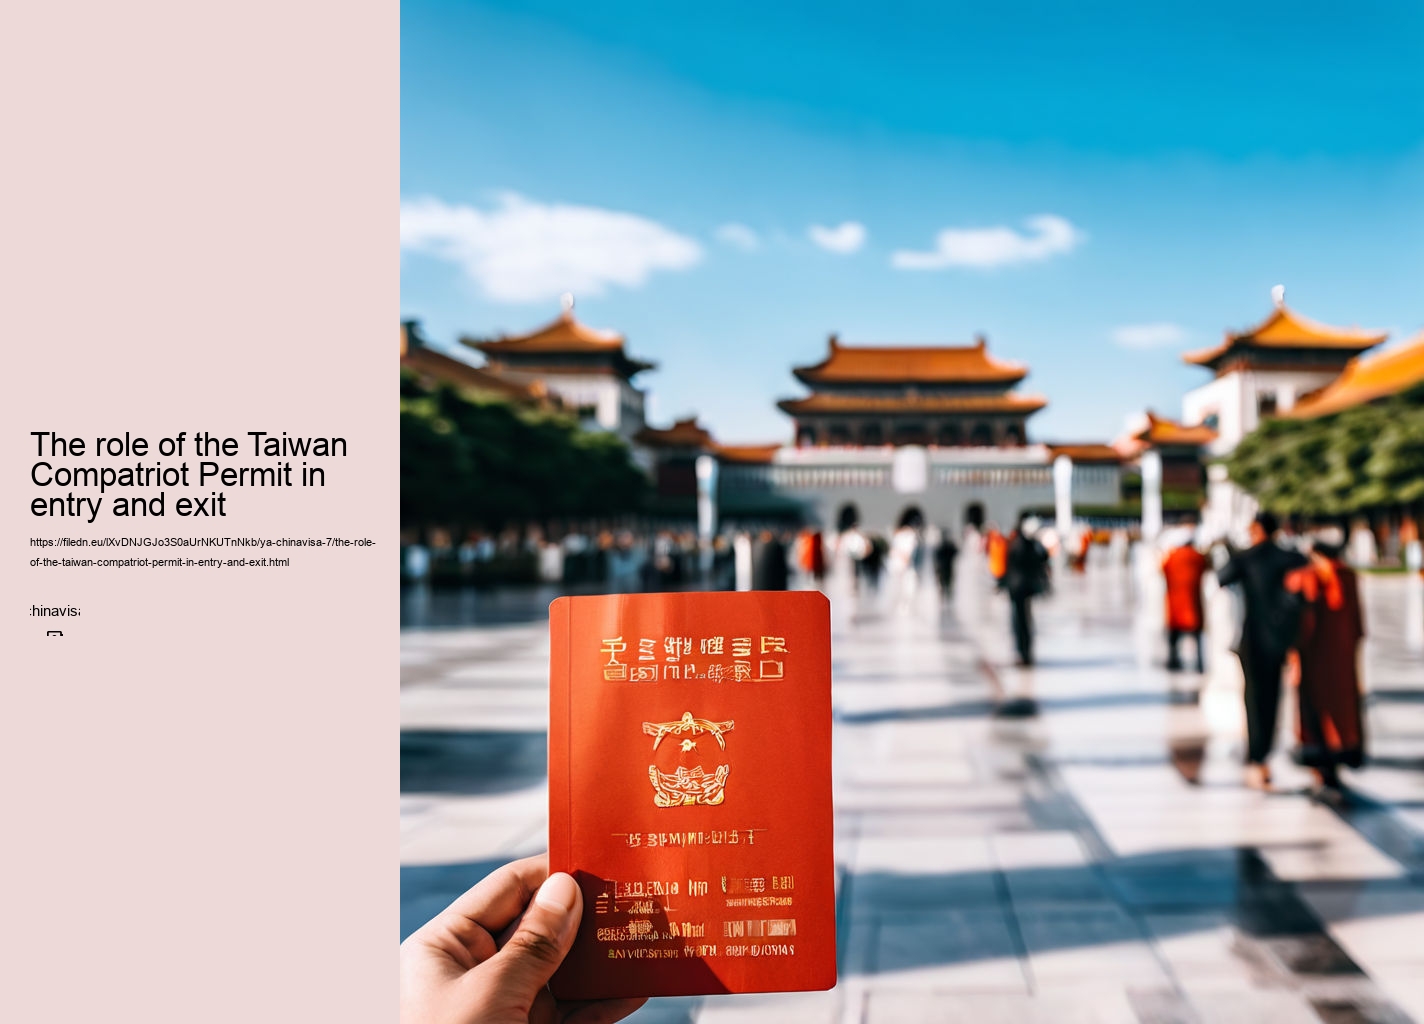 The role of the Taiwan Compatriot Permit in entry and exit